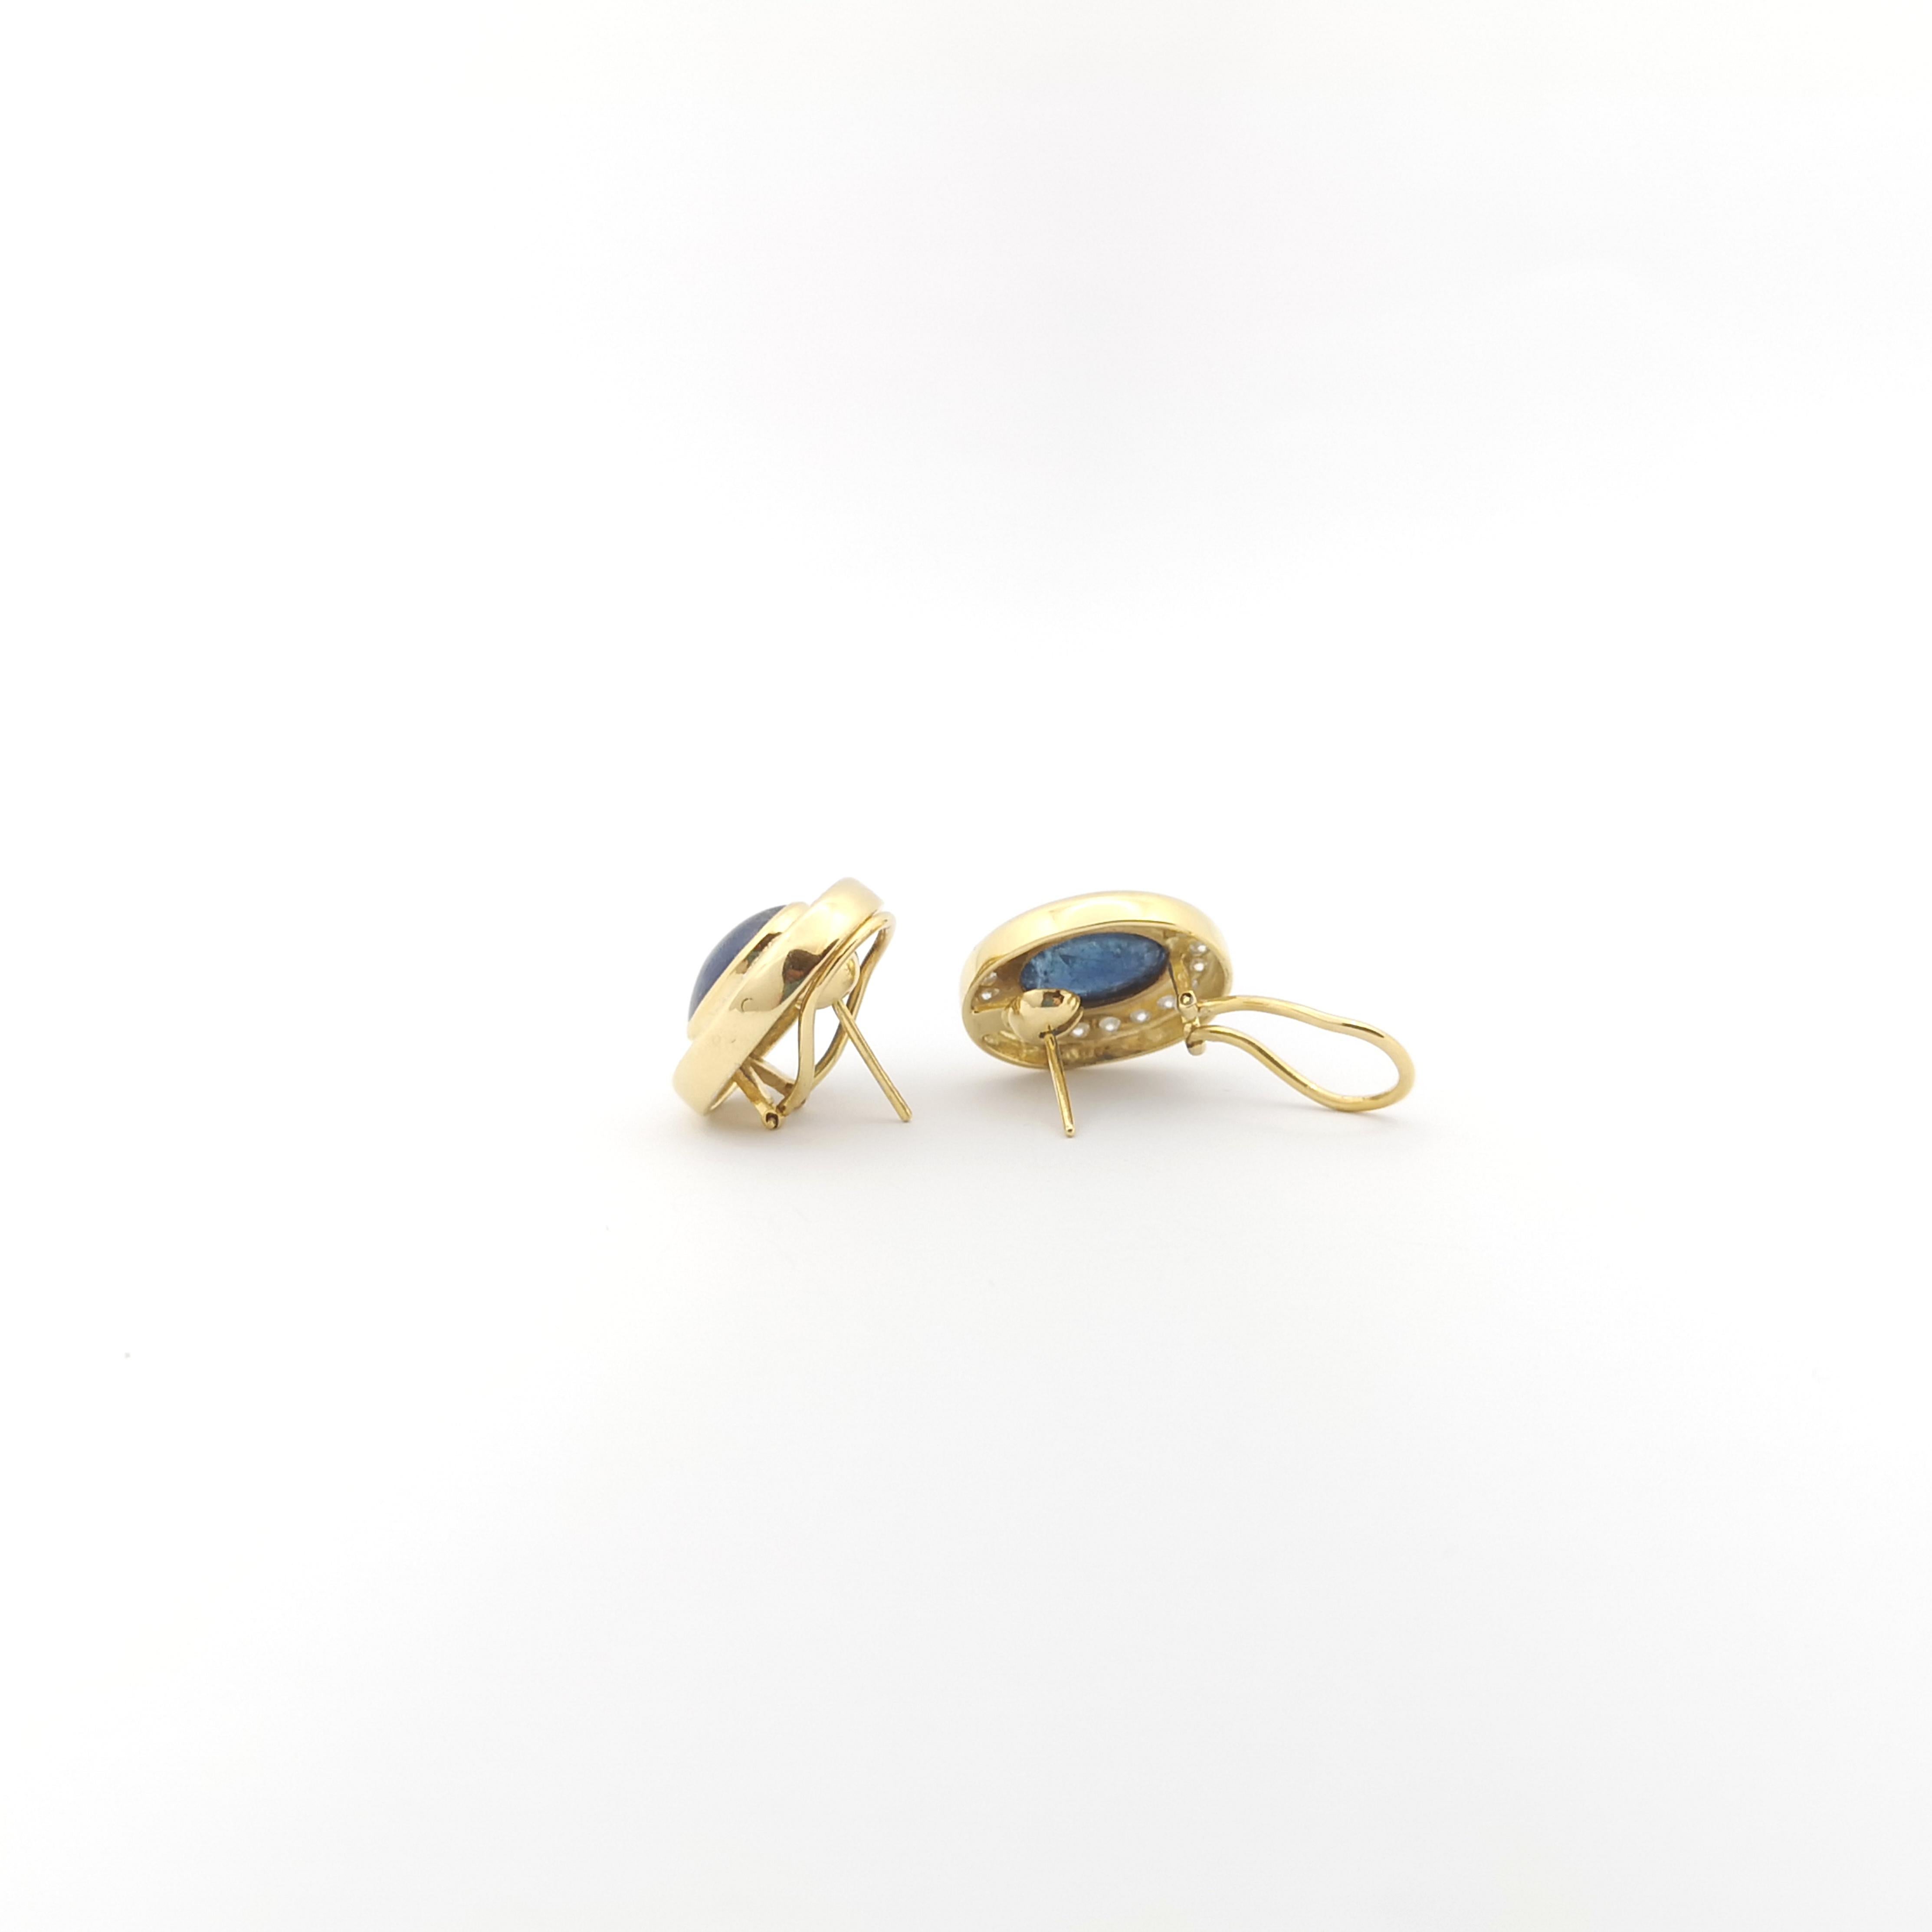 Cabochon Blue Sapphire with Diamond Earrings set in 18K Gold Settings For Sale 2